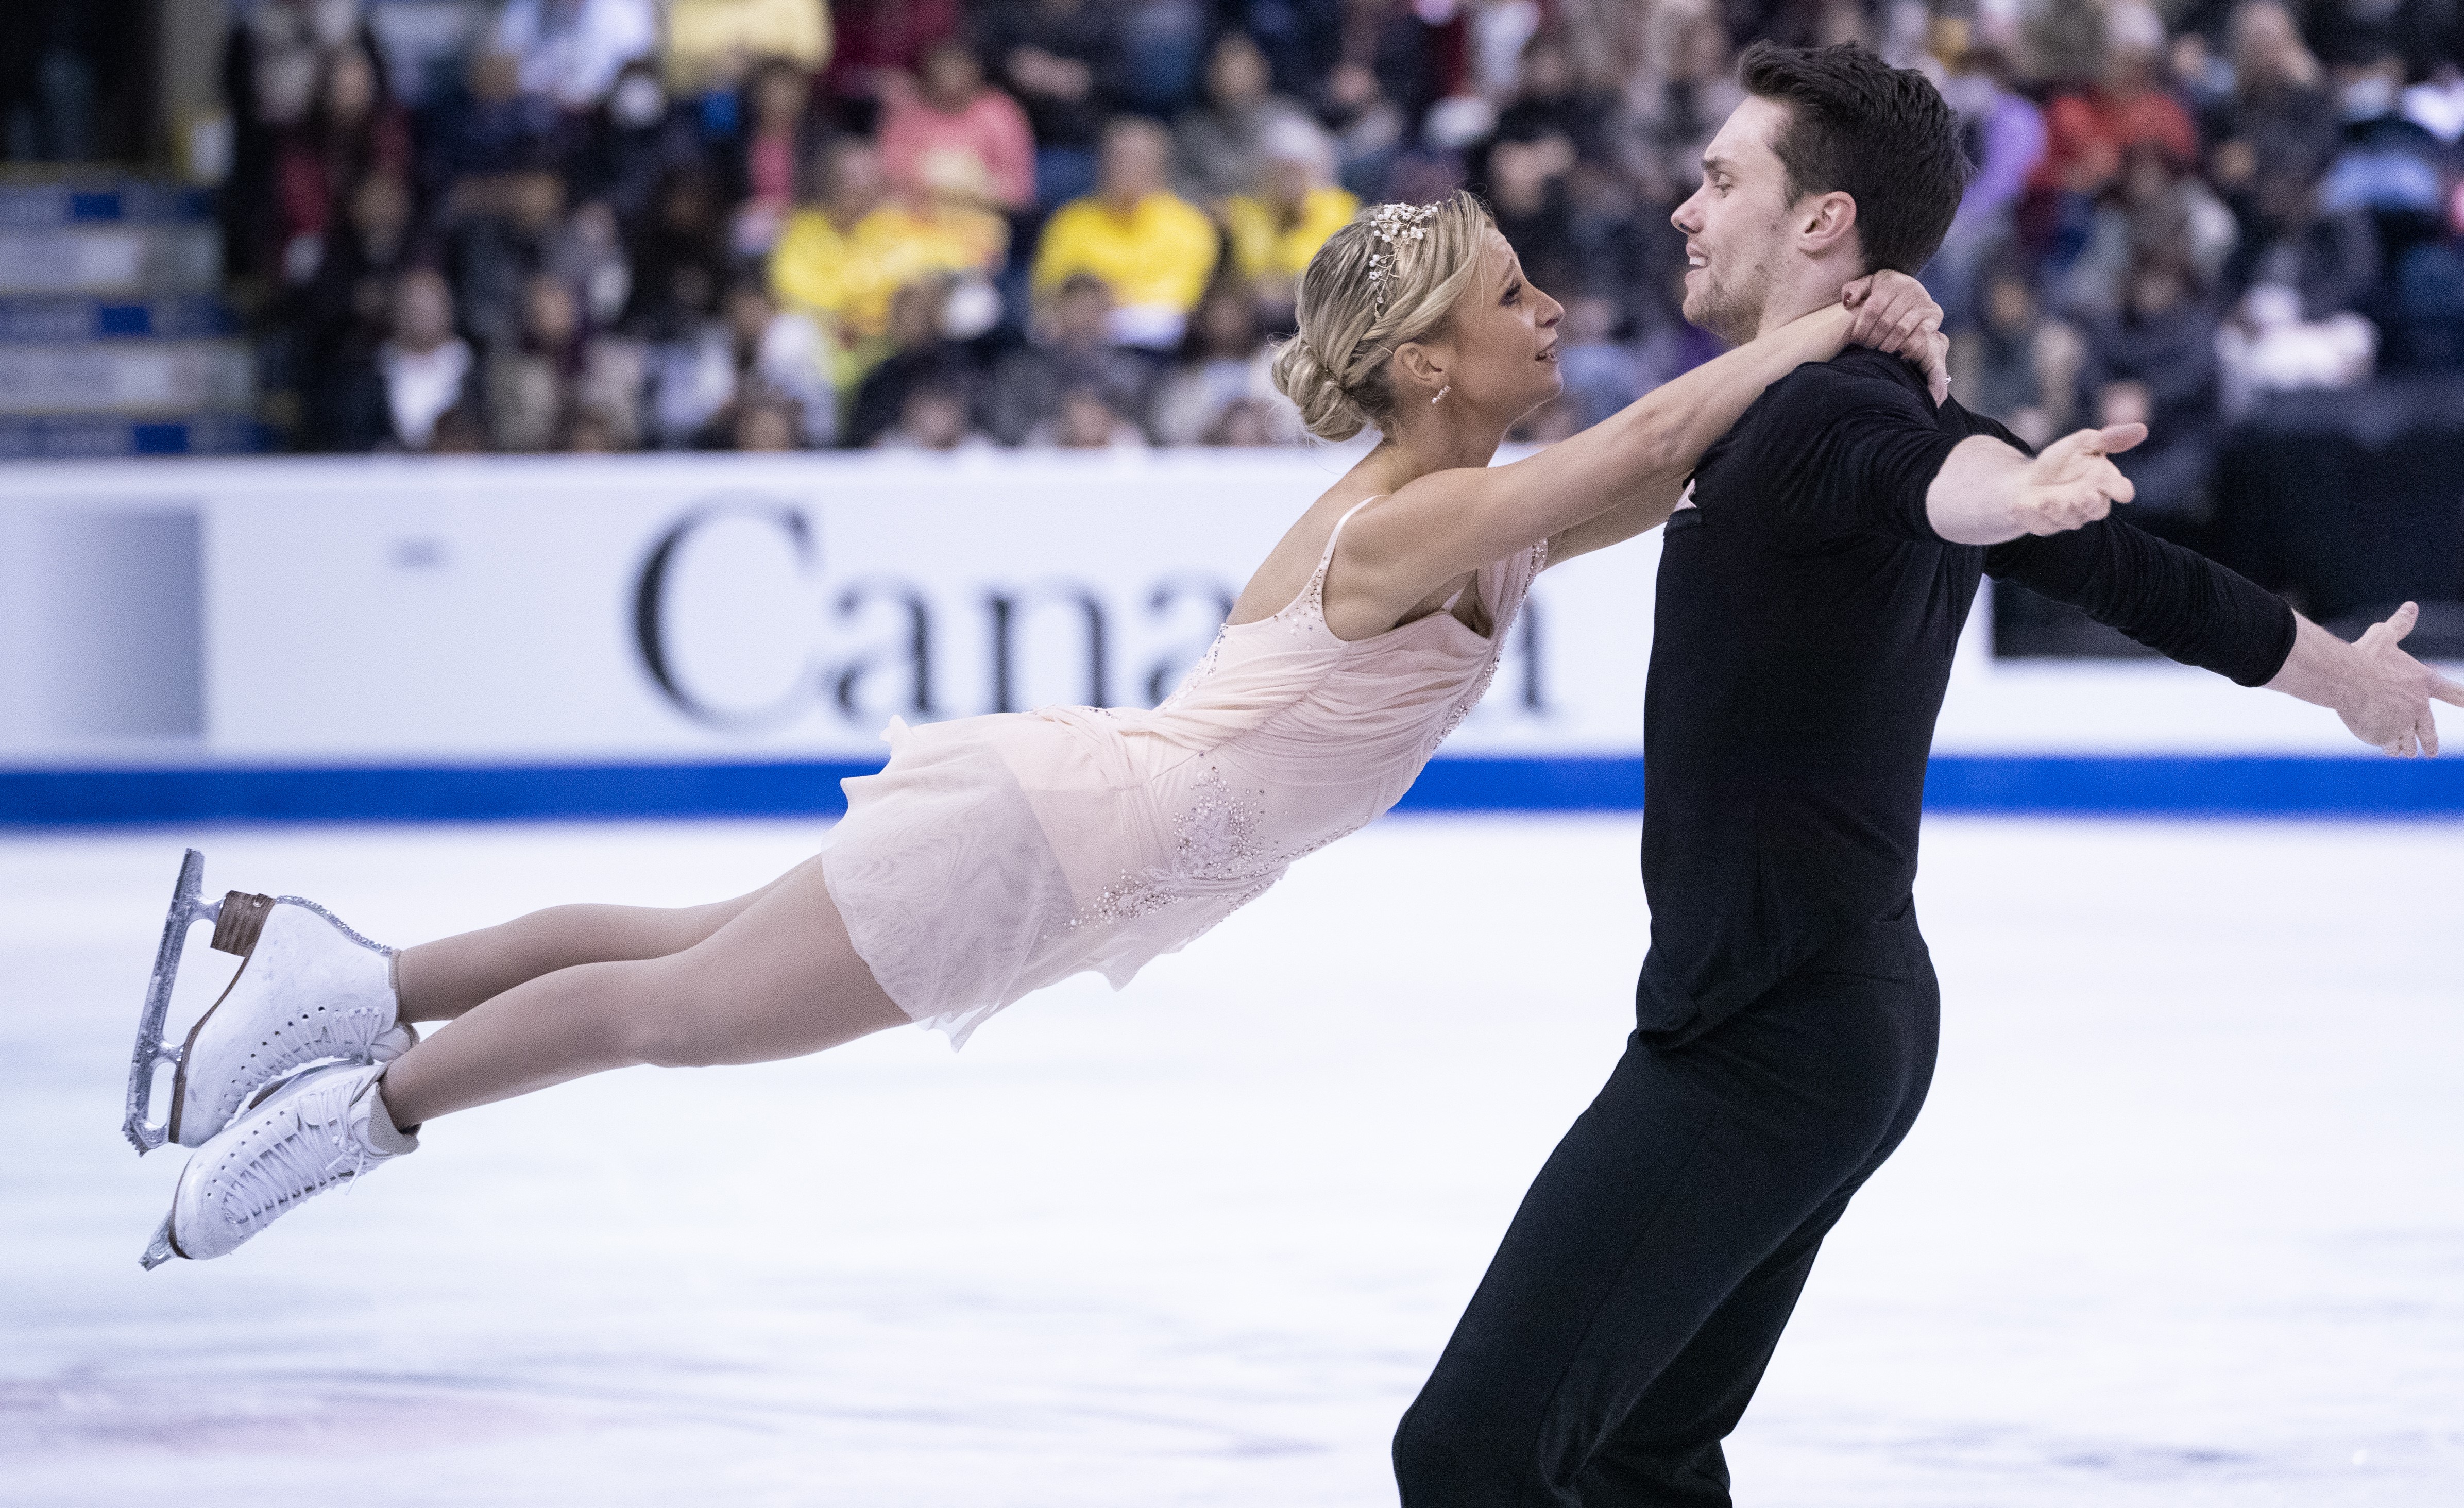 Team Canada eyes Olympic qualification at 2021 World Figure Skating Championships - Team Canada